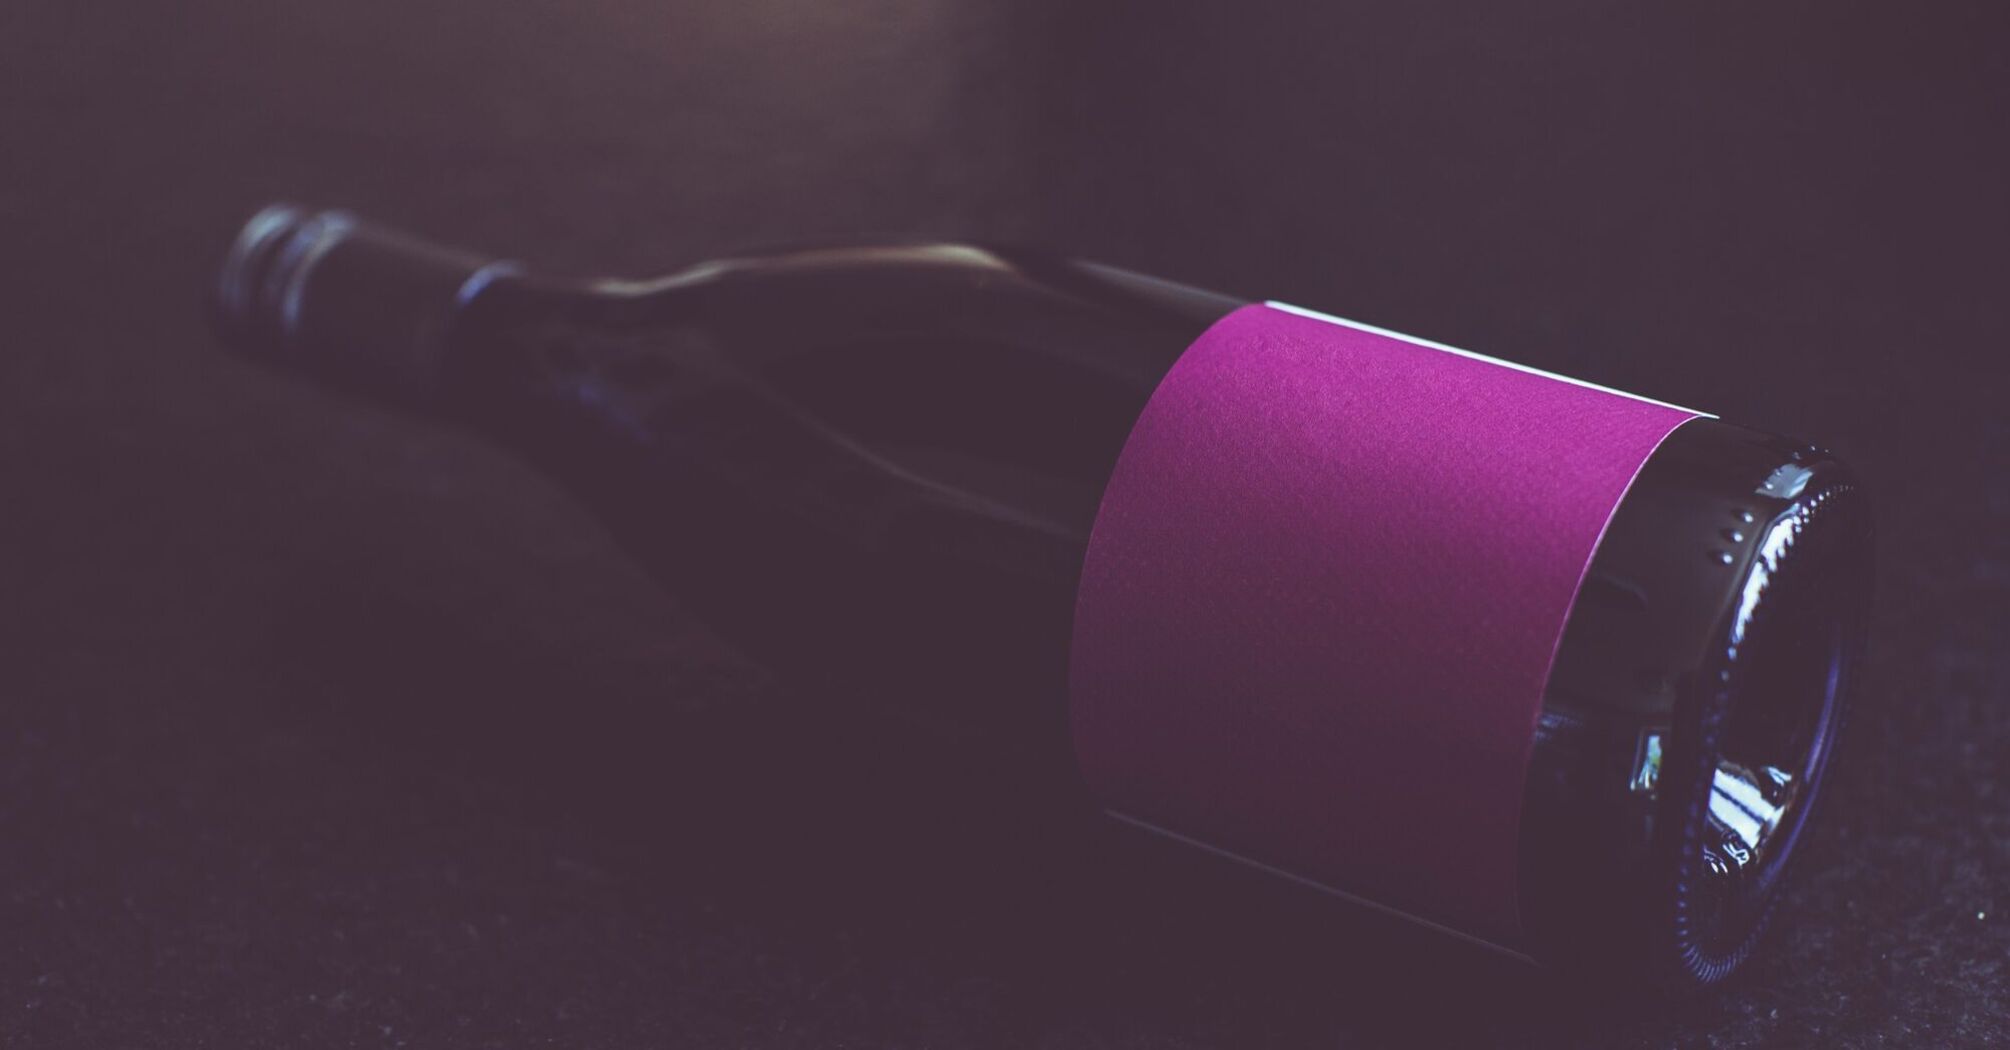 A bottle of wine with a purple label lying on its side